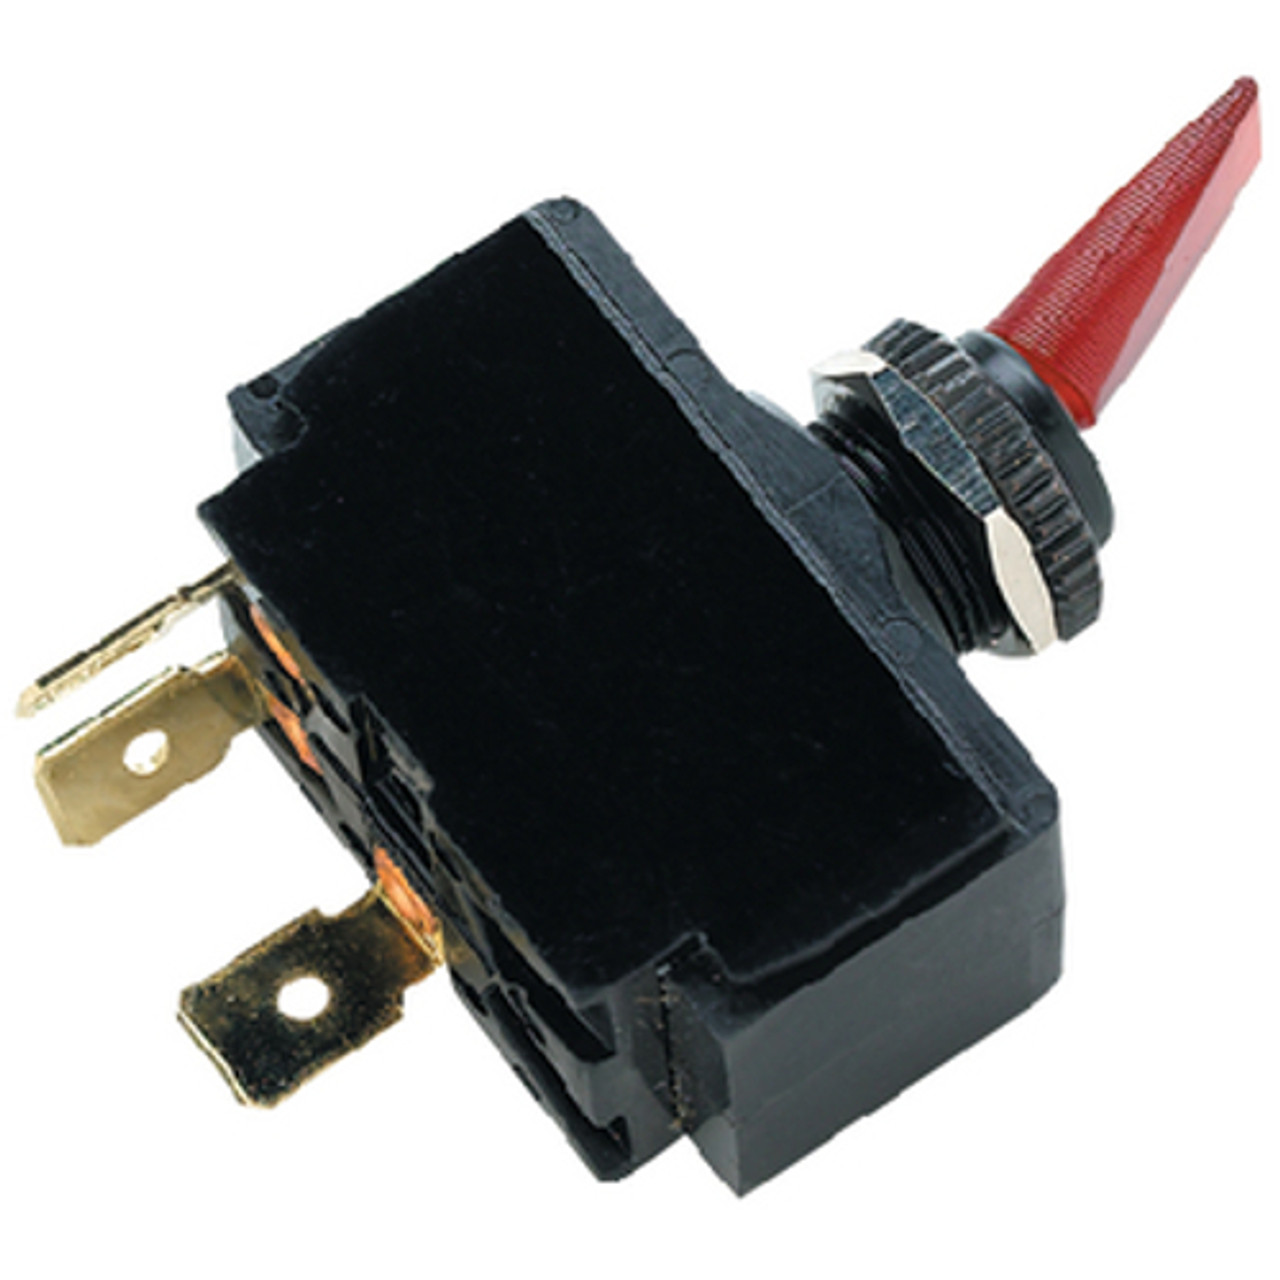 Red Illuminated SPST 2 Position On / Off Toggle Switch for Boats